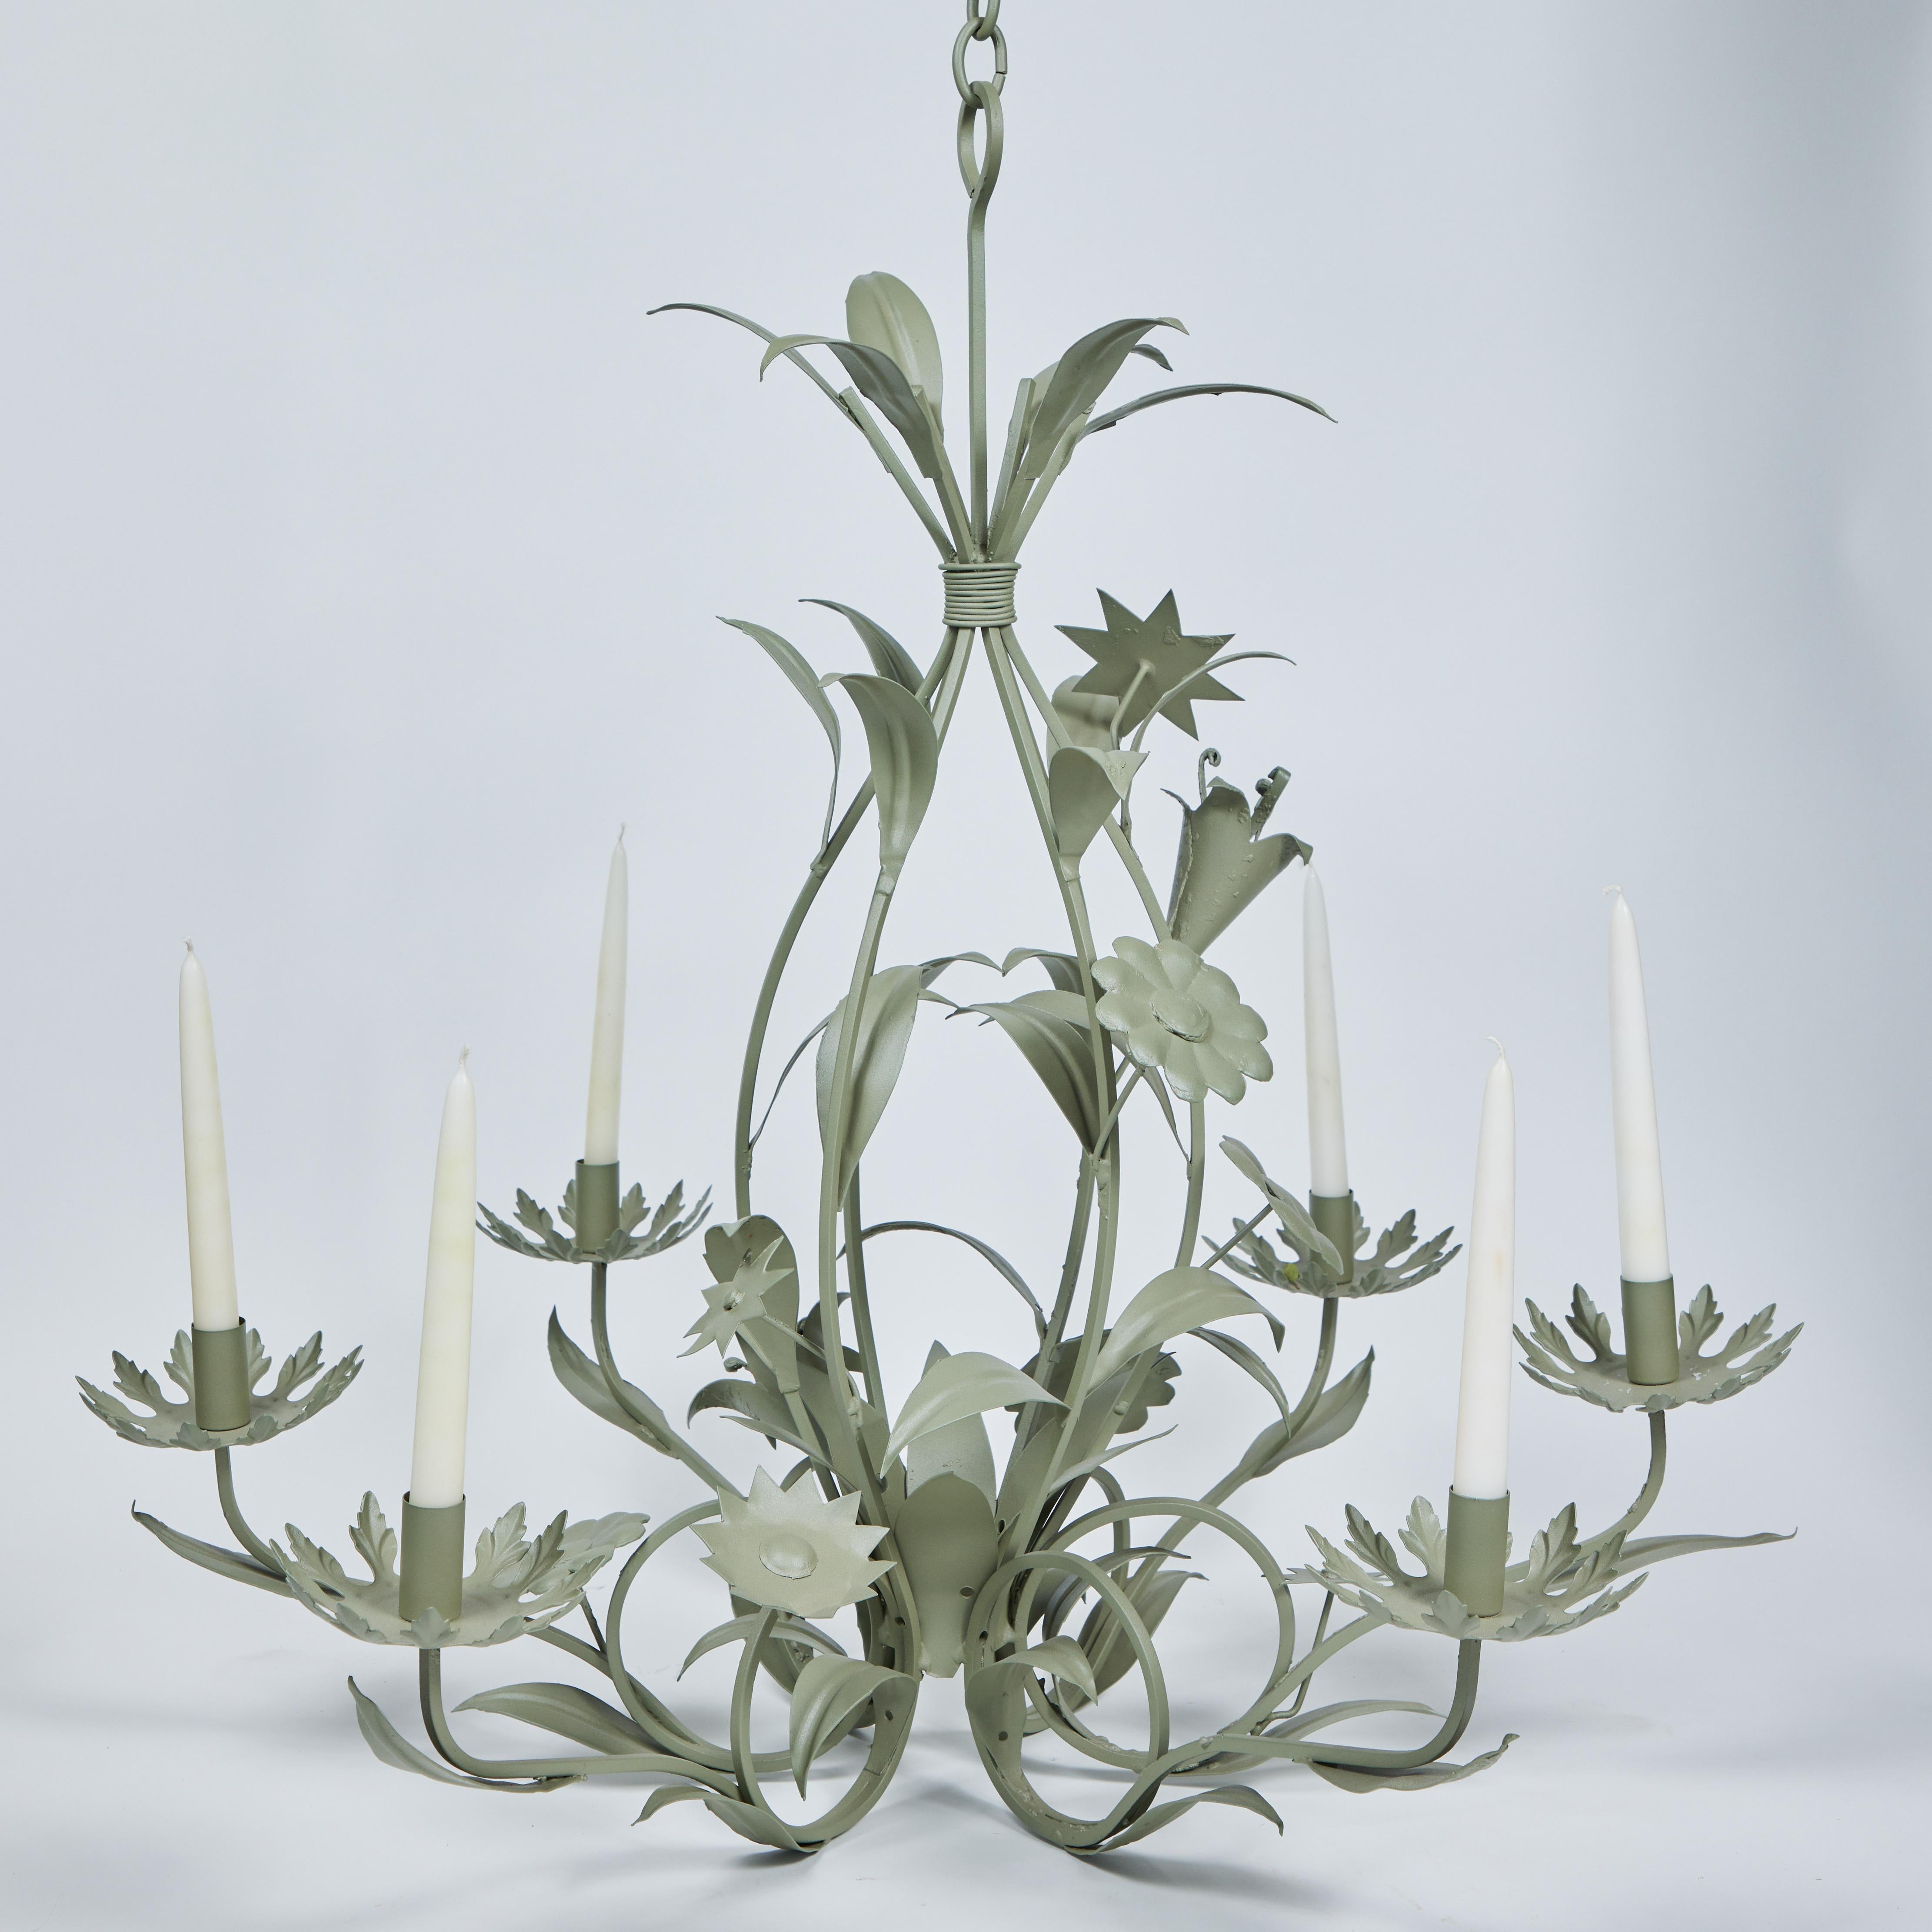 Light up your room with this eye-catching lovely vintage iron hanging candle chandelier comprised of ornamental flowers & leaves. This fixture has been newly powder coated in 'weathered green' and is an elegant addition to any dining room or